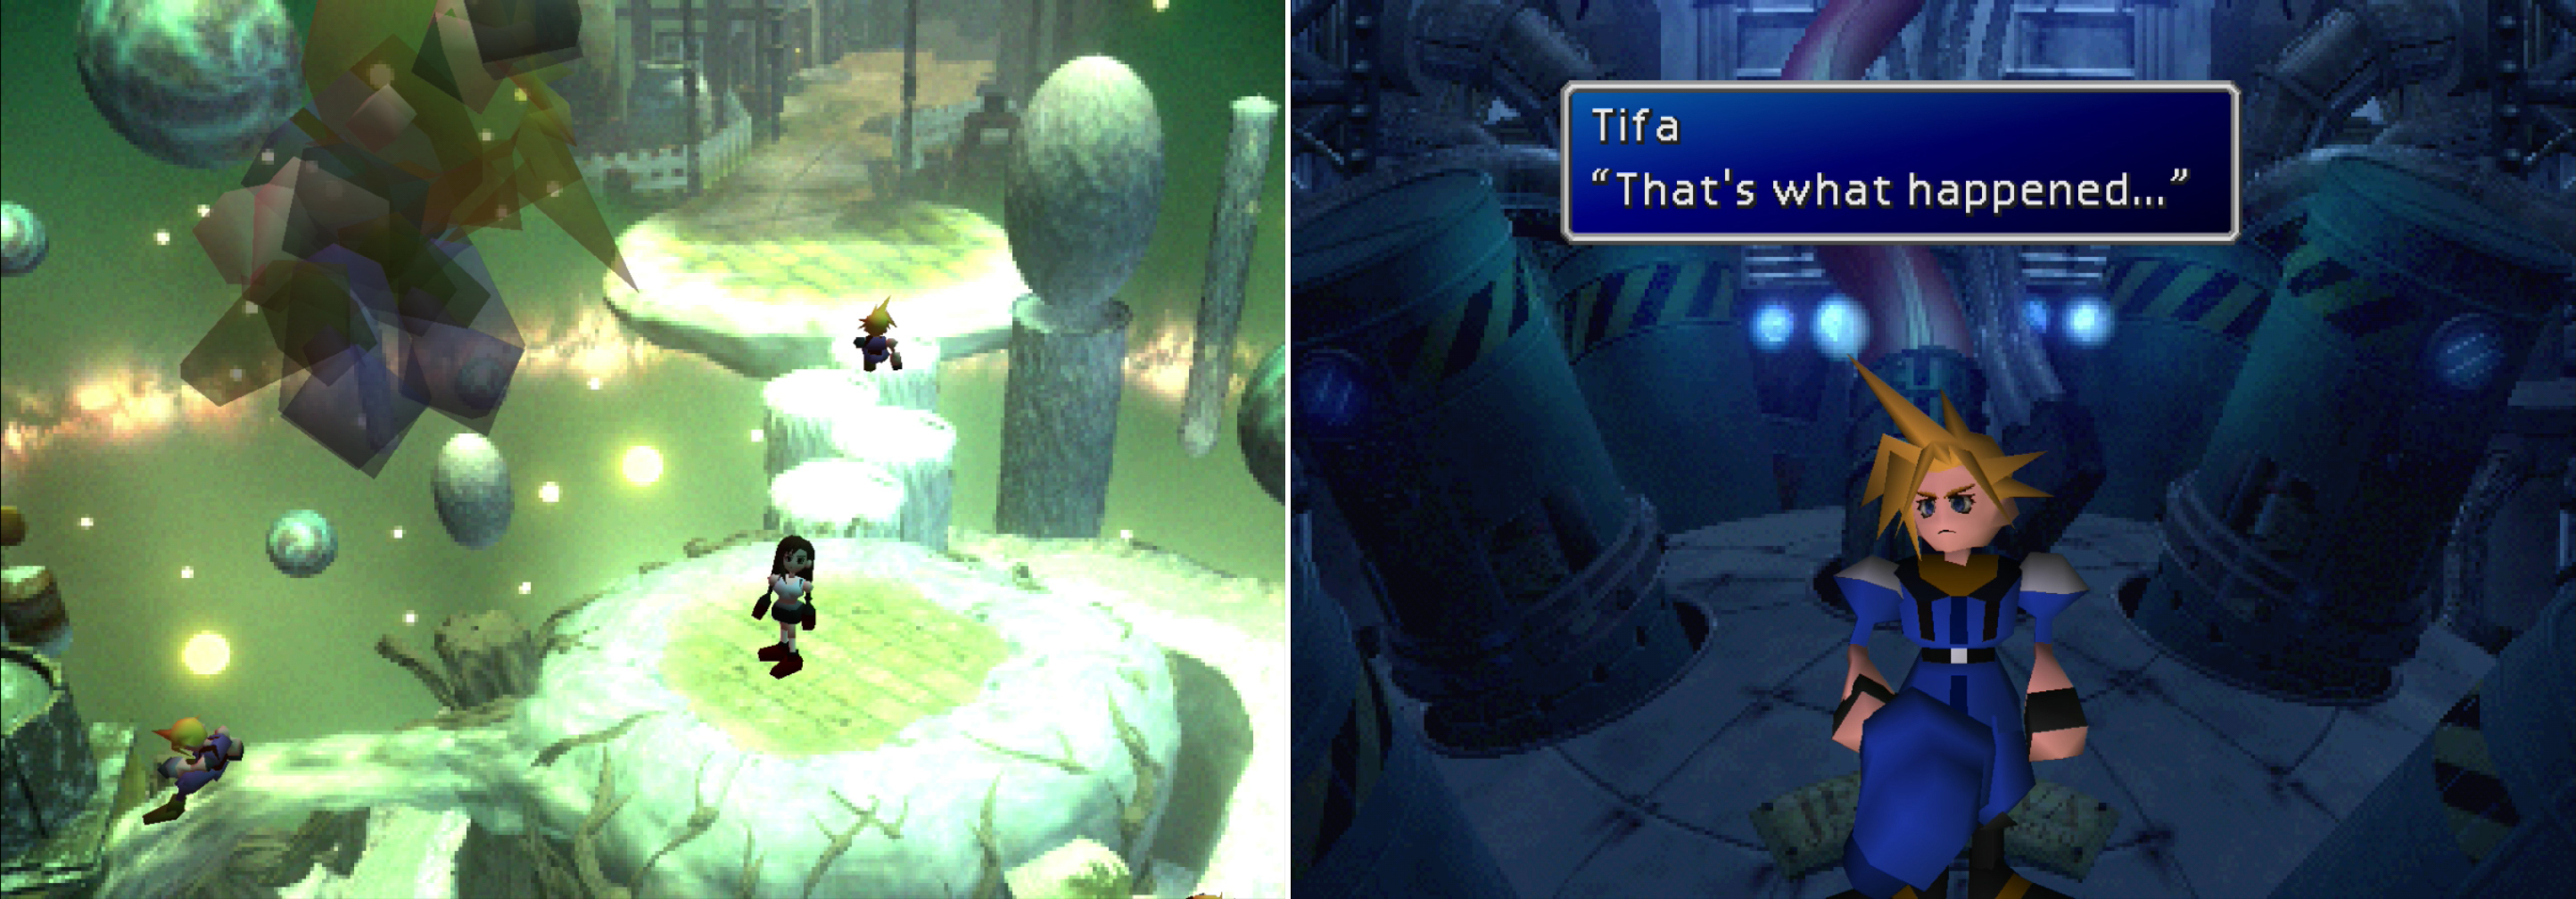 Tifa will have to help Cloud reassemble the broken fragments of his consciousness in the Lifestream (left). After picking through Clouds repressed memories, the truth will finally be revealed (right).